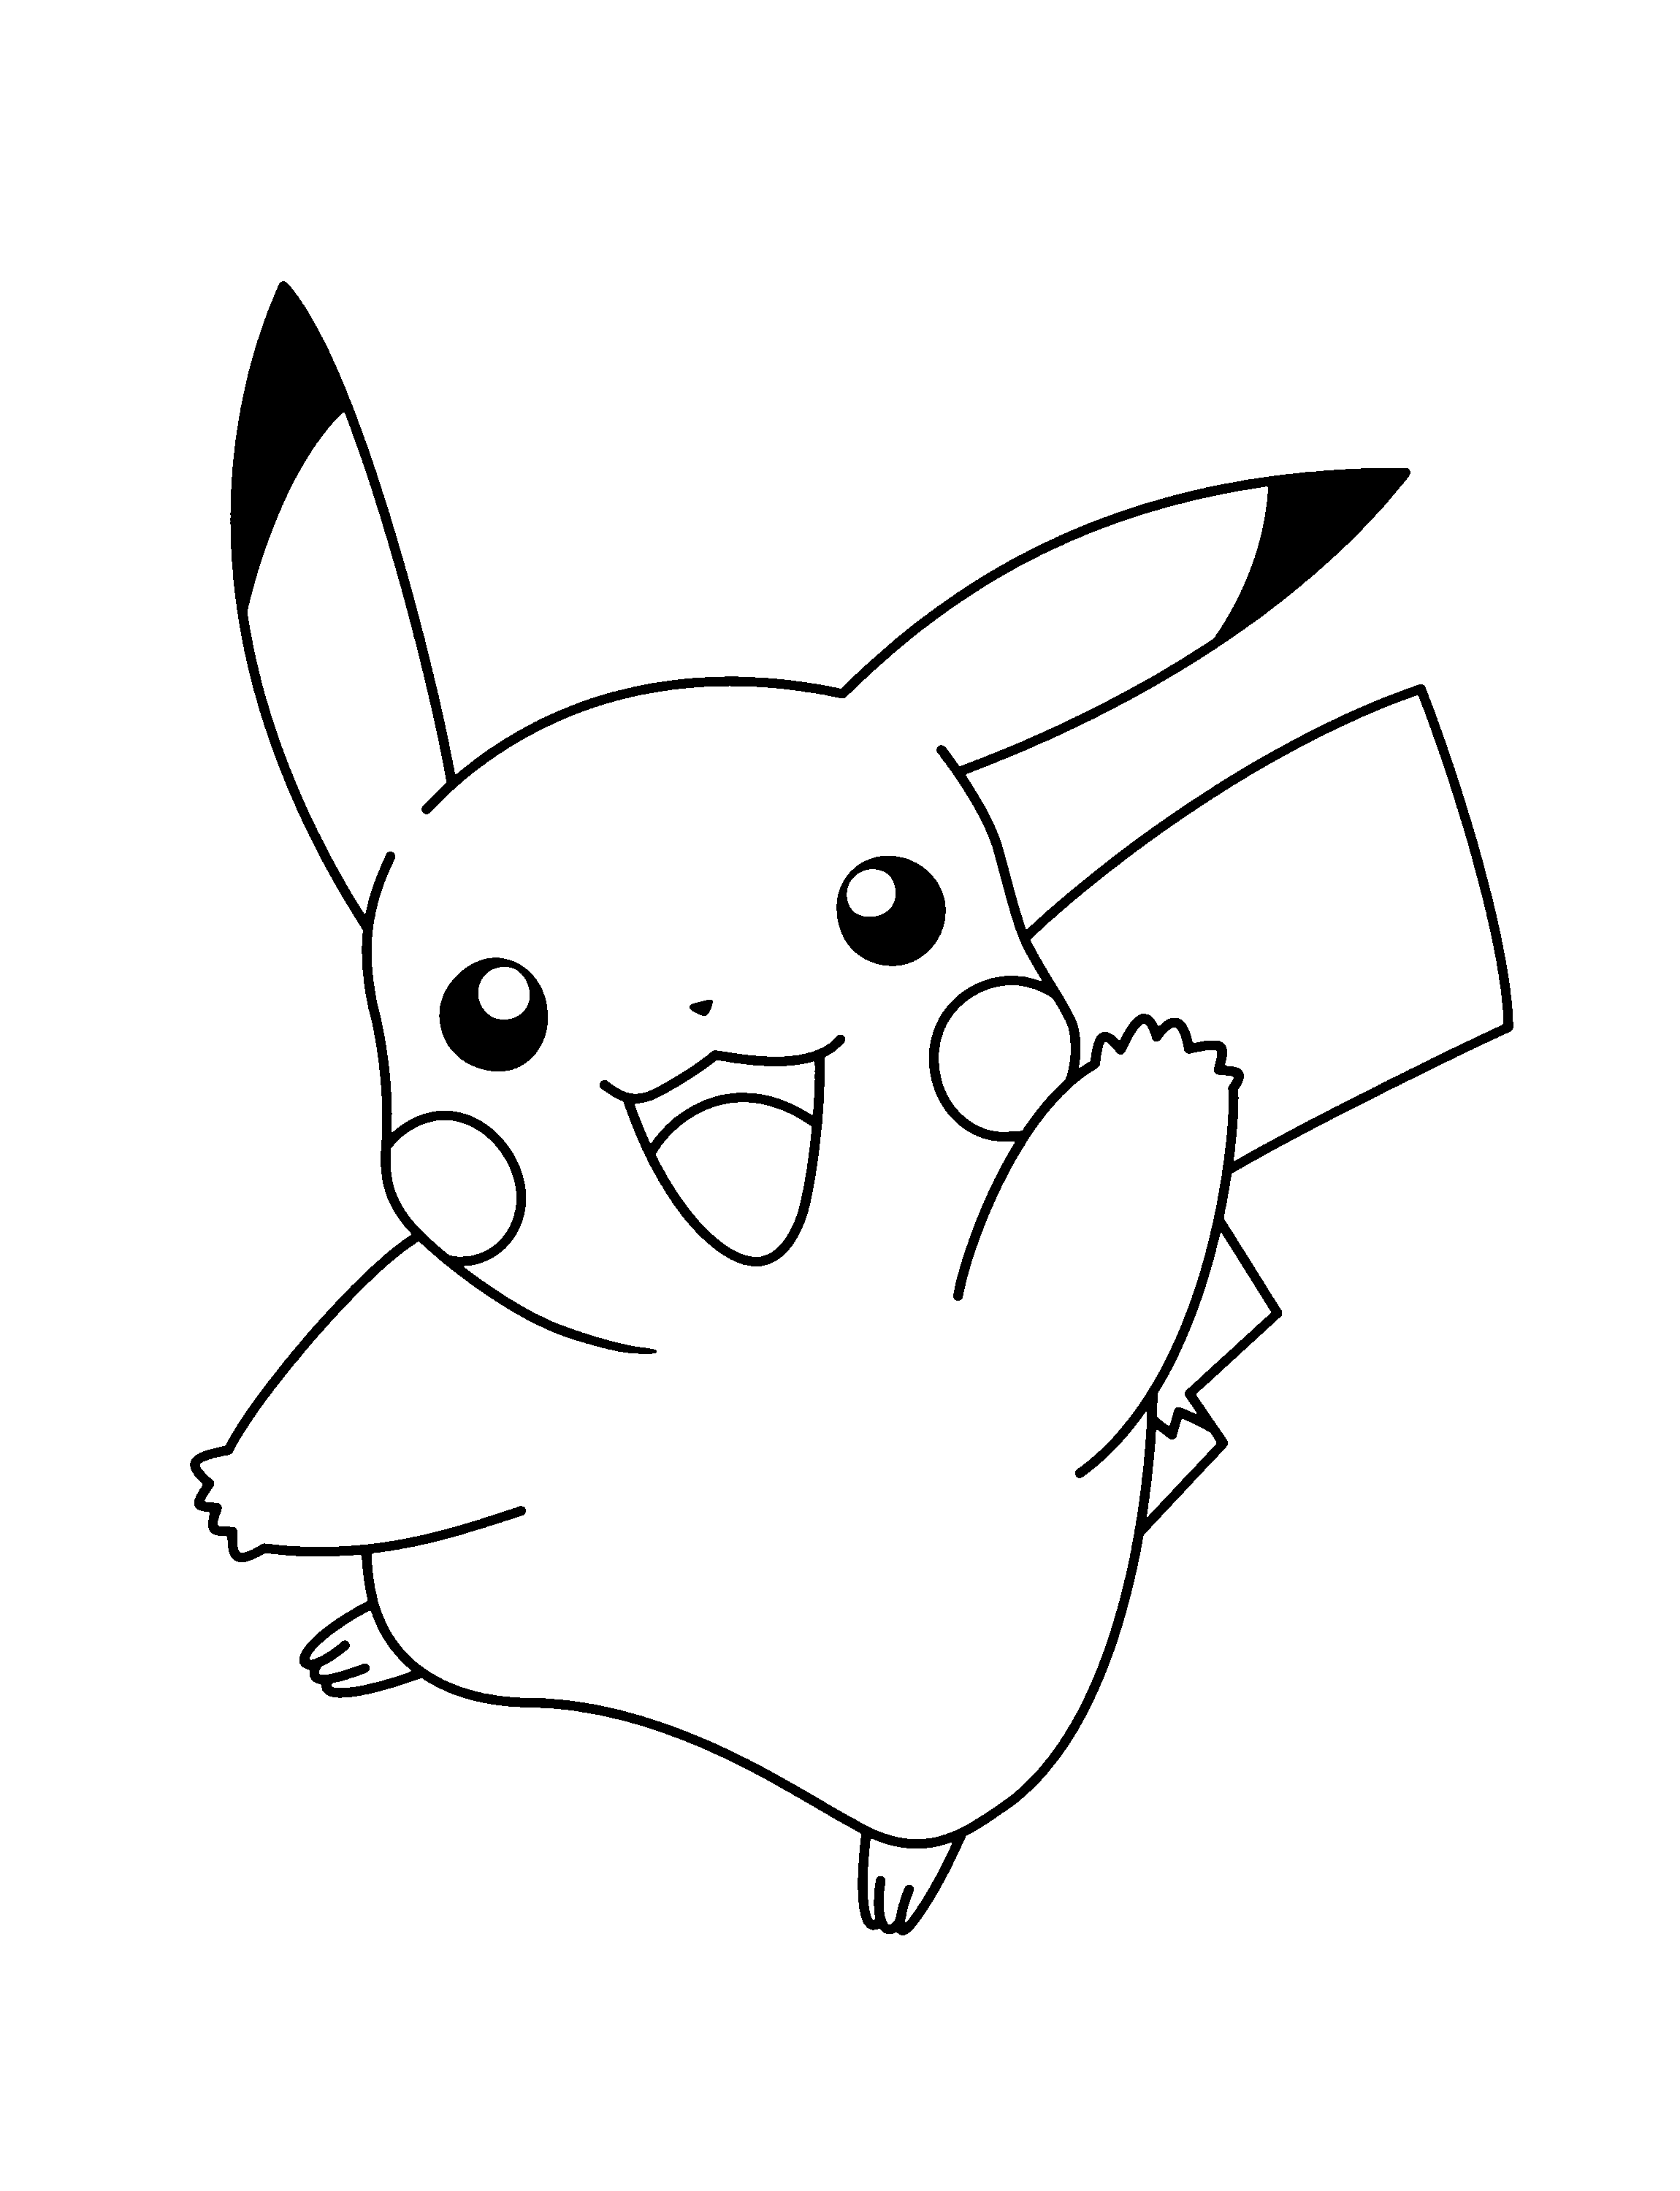 Pokemon Coloring Pages 2018 - Z31 Coloring Page